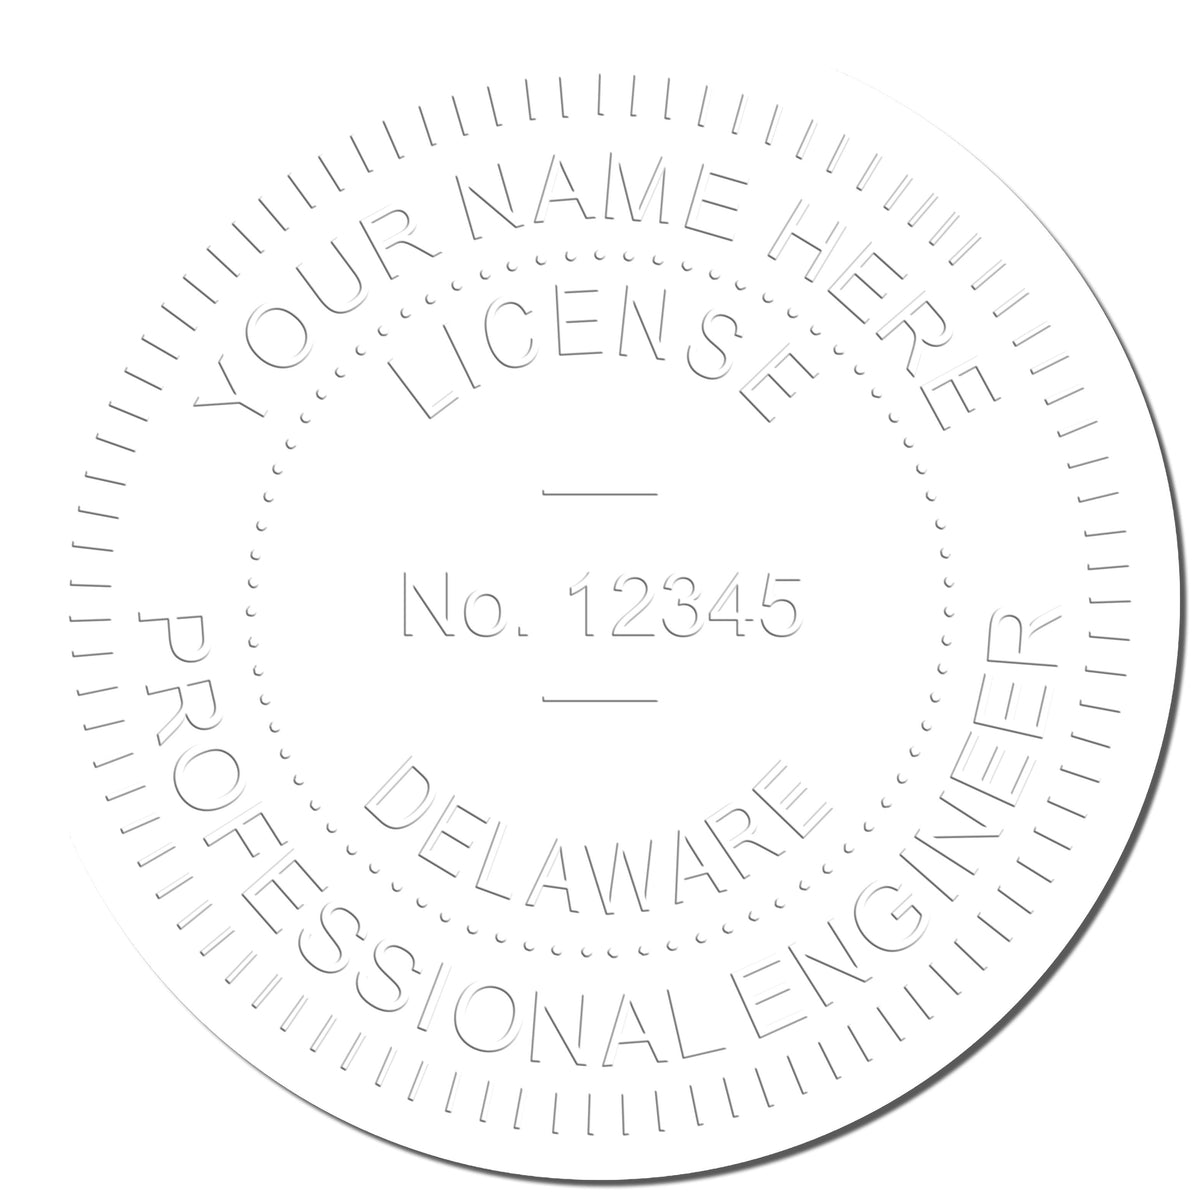 The Soft Delaware Professional Engineer Seal stamp impression comes to life with a crisp, detailed photo on paper - showcasing true professional quality.